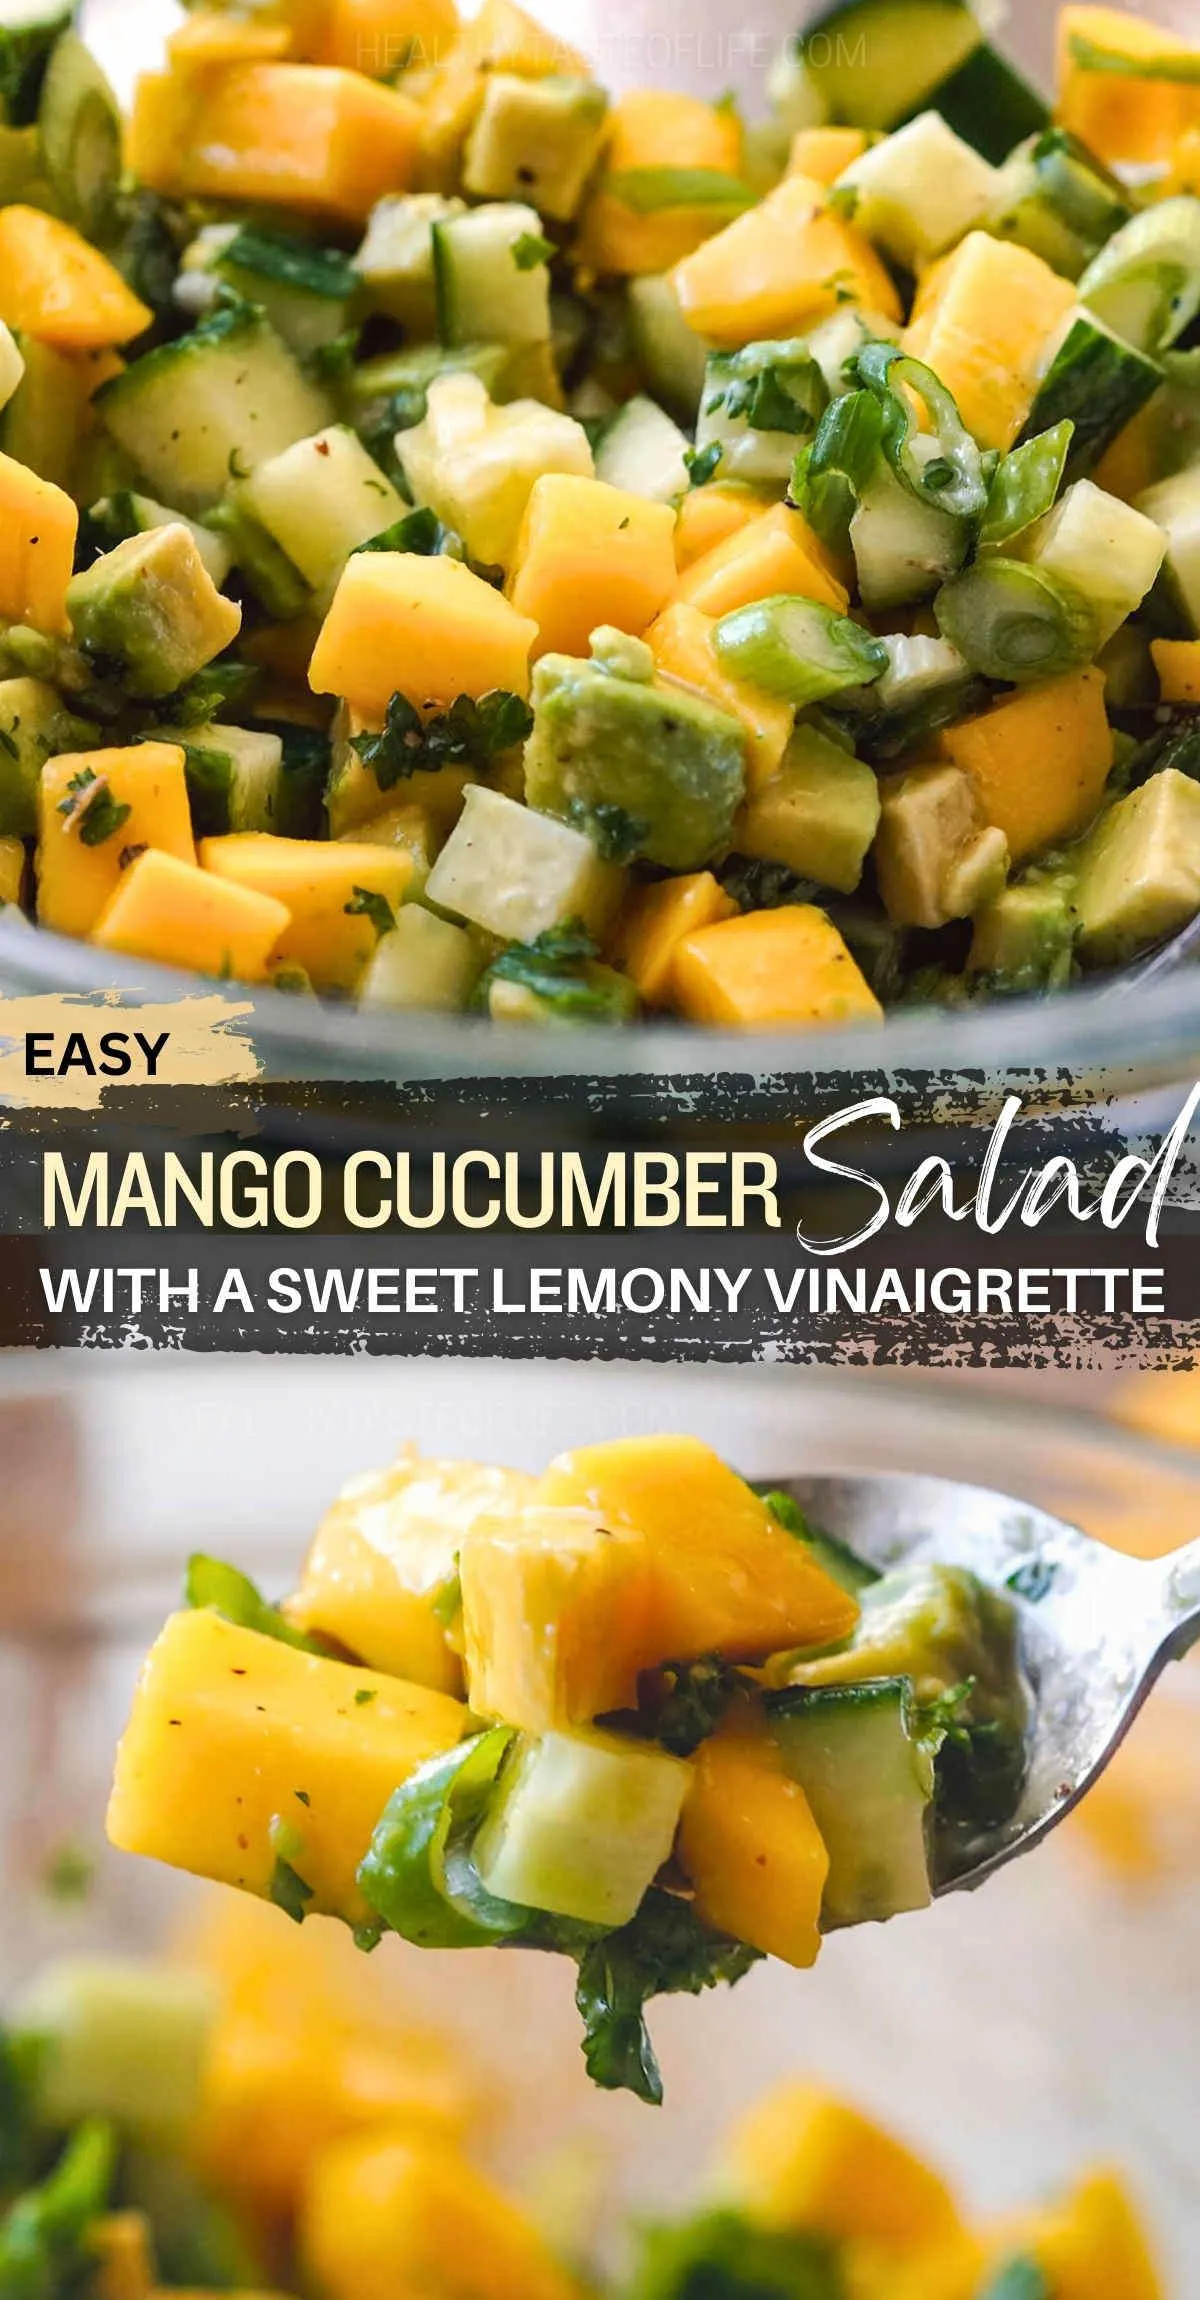 This mango cucumber avocado salad is the perfect summer side dish. Fresh cucumbers and mangoes are cubed and combined with a creamy avocado for refreshing flavors. The dressing: zingy lemon honey vinaigrette enhances and balances the salad’s acidity and sweetness. Quick & easy to prepare, this salad cucumber mango salad can be enjoyed as a light snack or side dish for lunch/ dinner. The best and easy mango cucumber avocado salad recipe. #mango #cucumber #salad #avocado #summersalad  #mangosalad